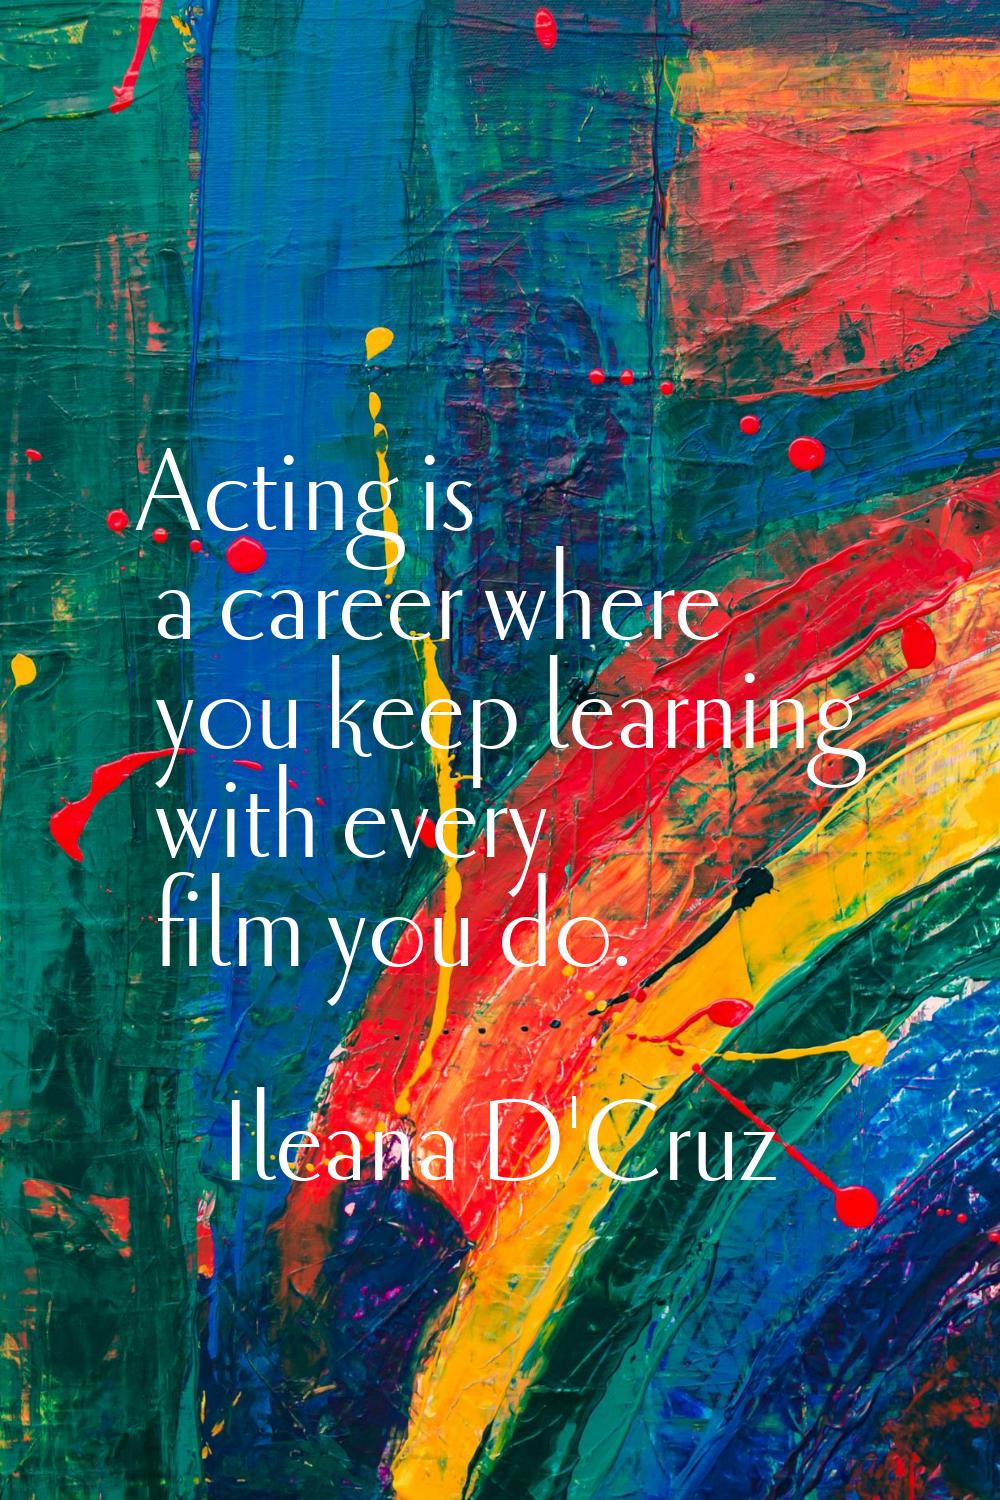 Acting is a career where you keep learning with every film you do.